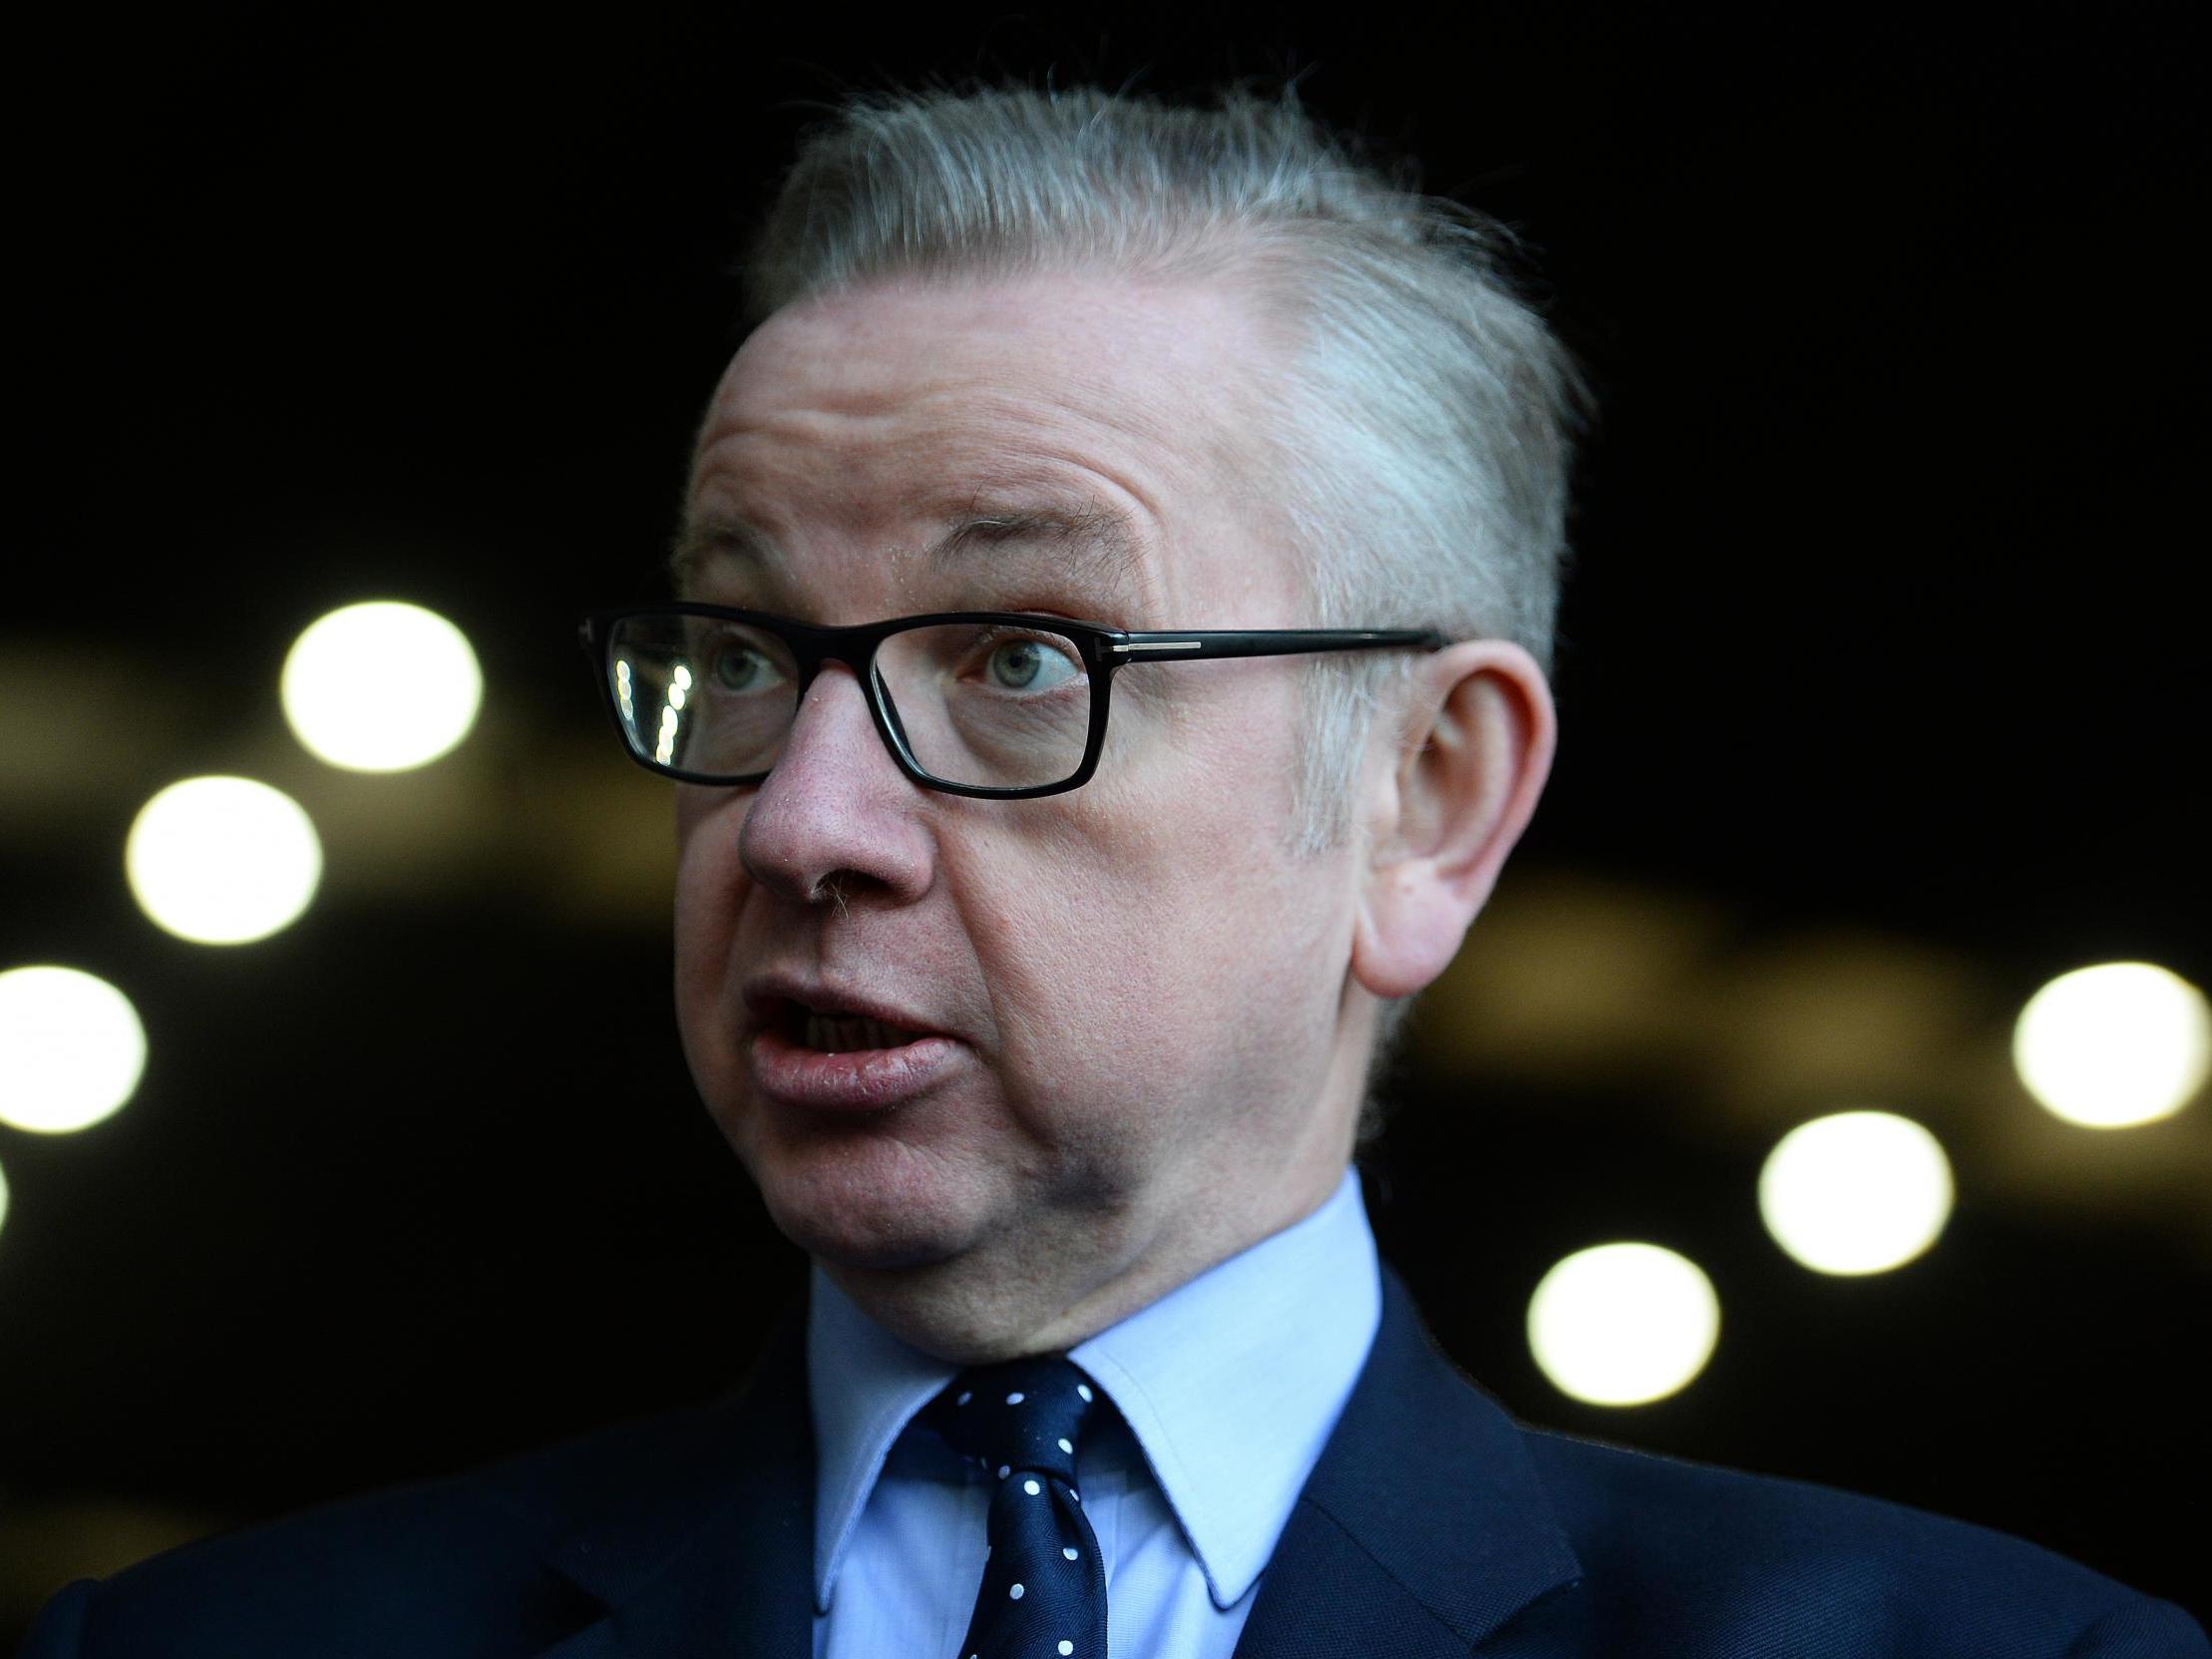 Michael Gove, favourite with most bookies, headed the Vote Leave campaign with Boris Johnson